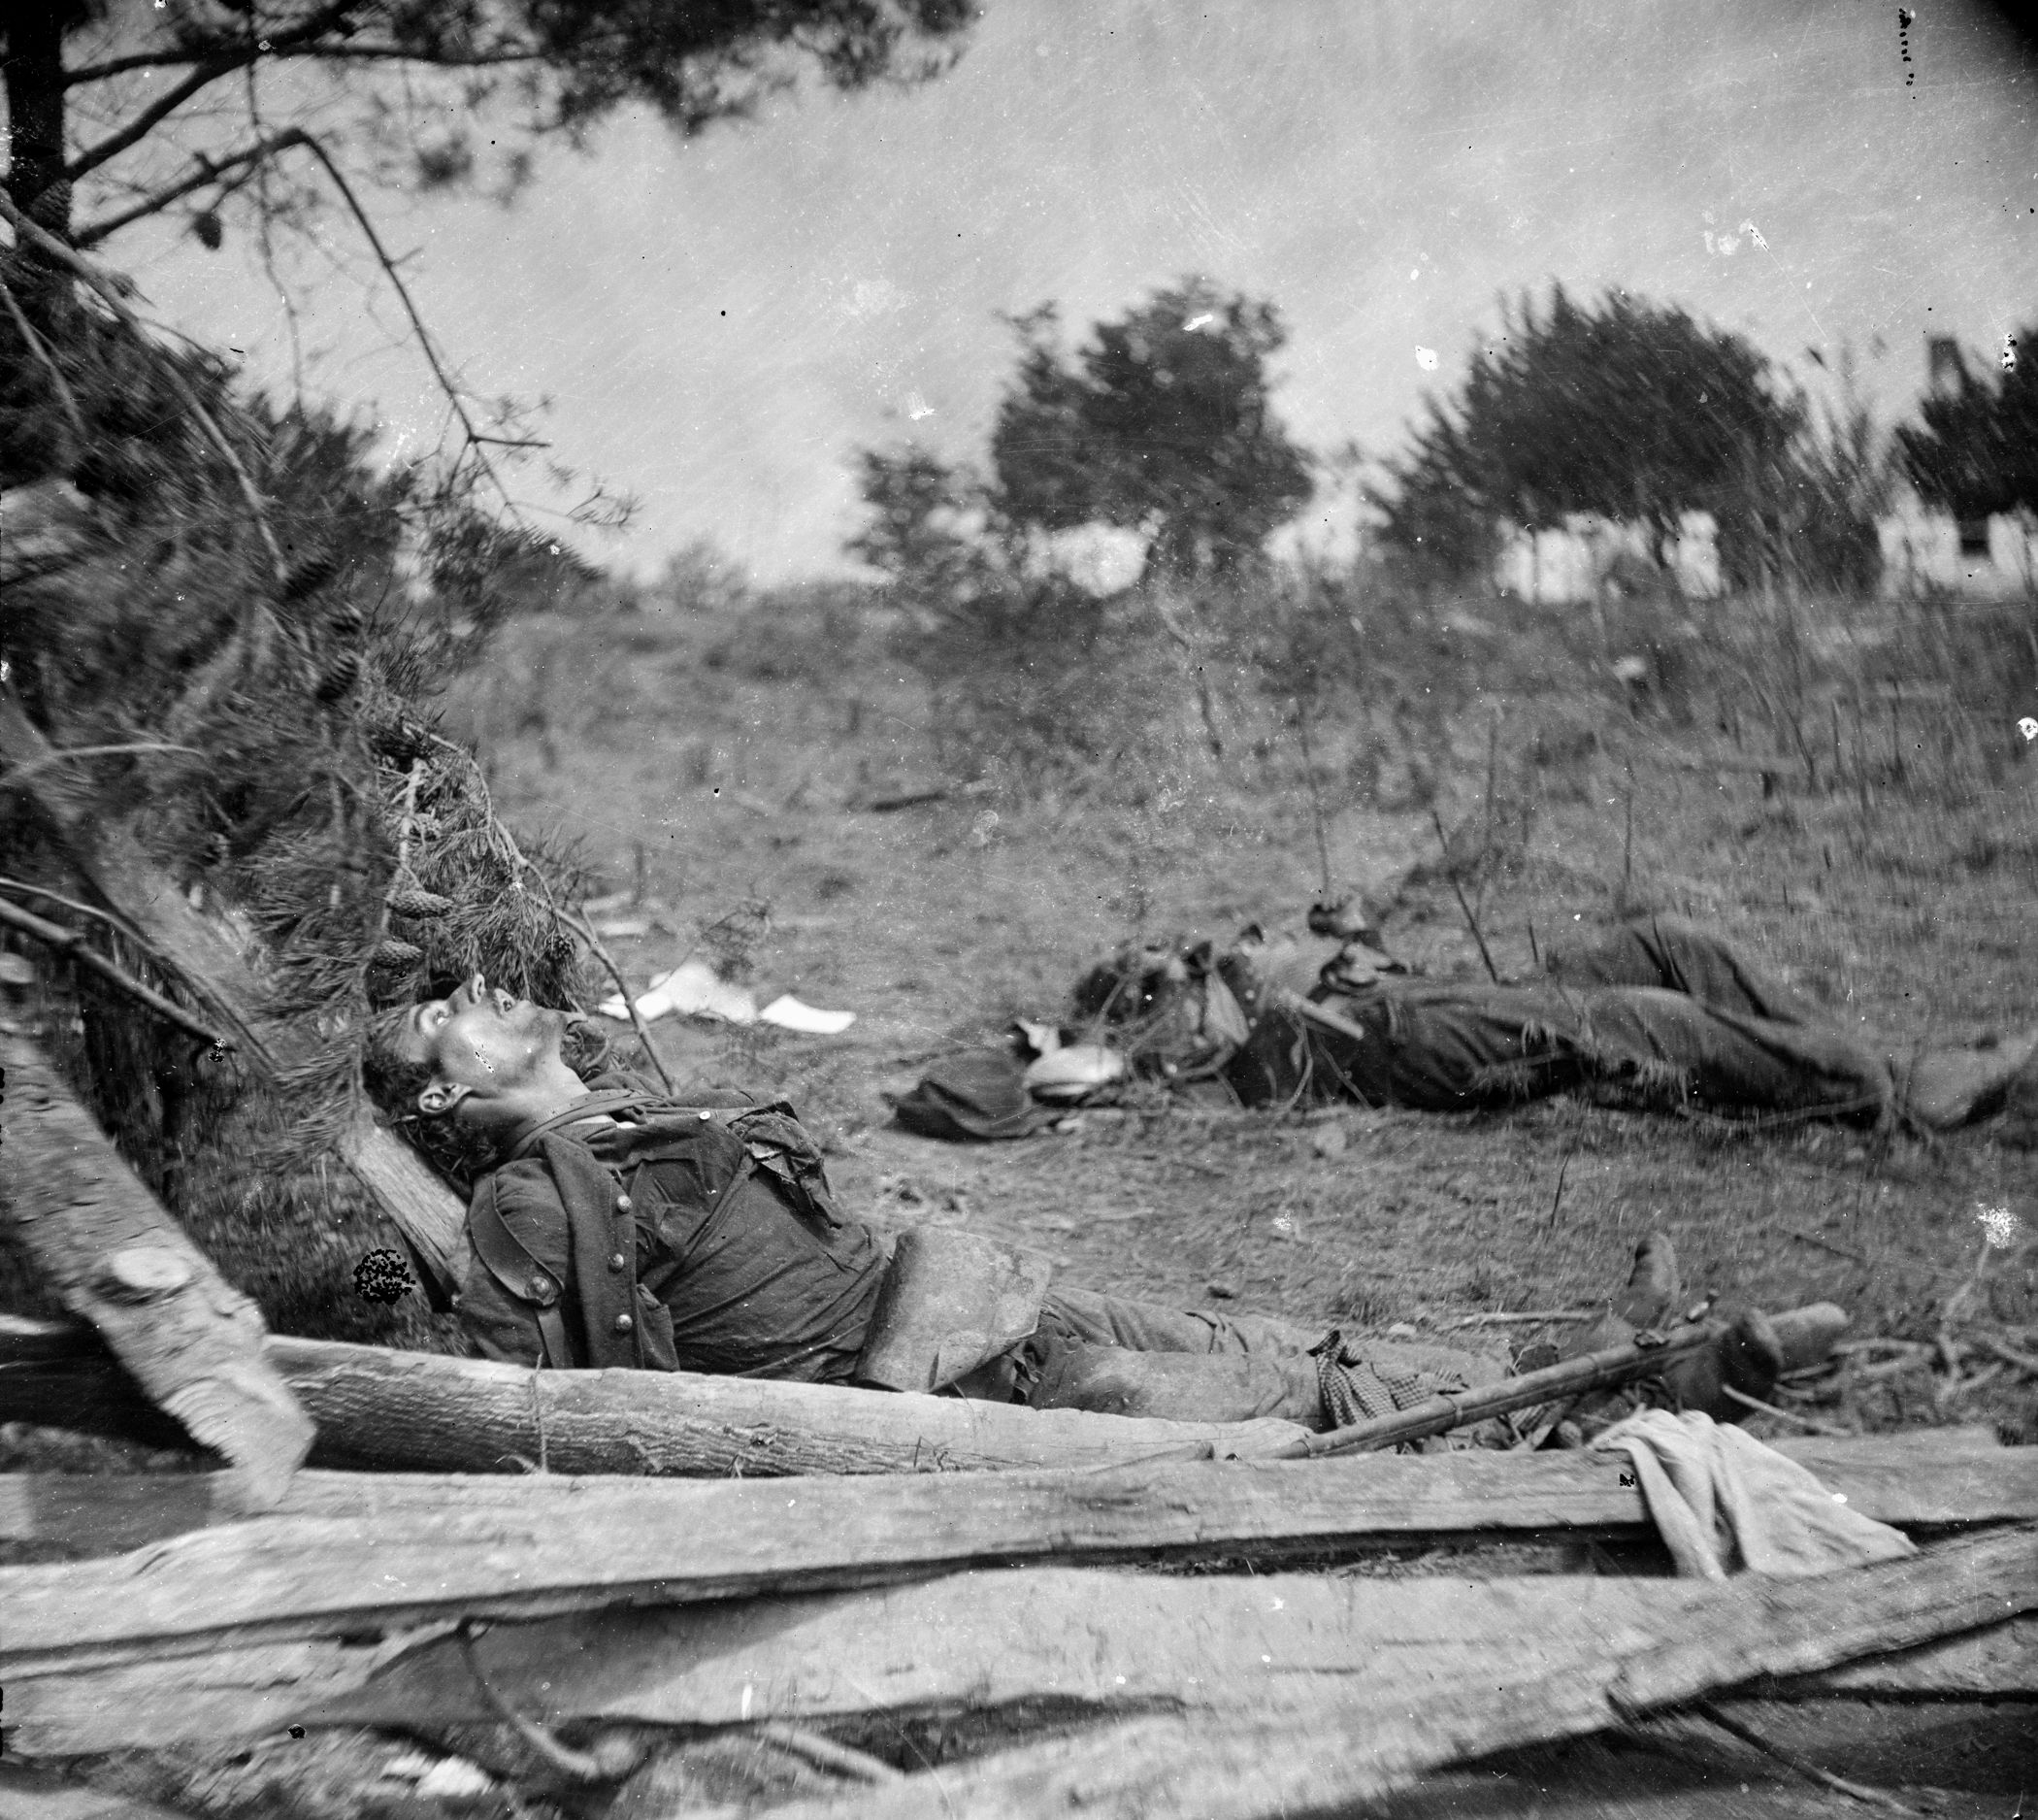 As the bodies of these slain Confederates mutely attest, the brutal fighting at Spotsylvania extracted a heavy toll on soldiers of both sides.